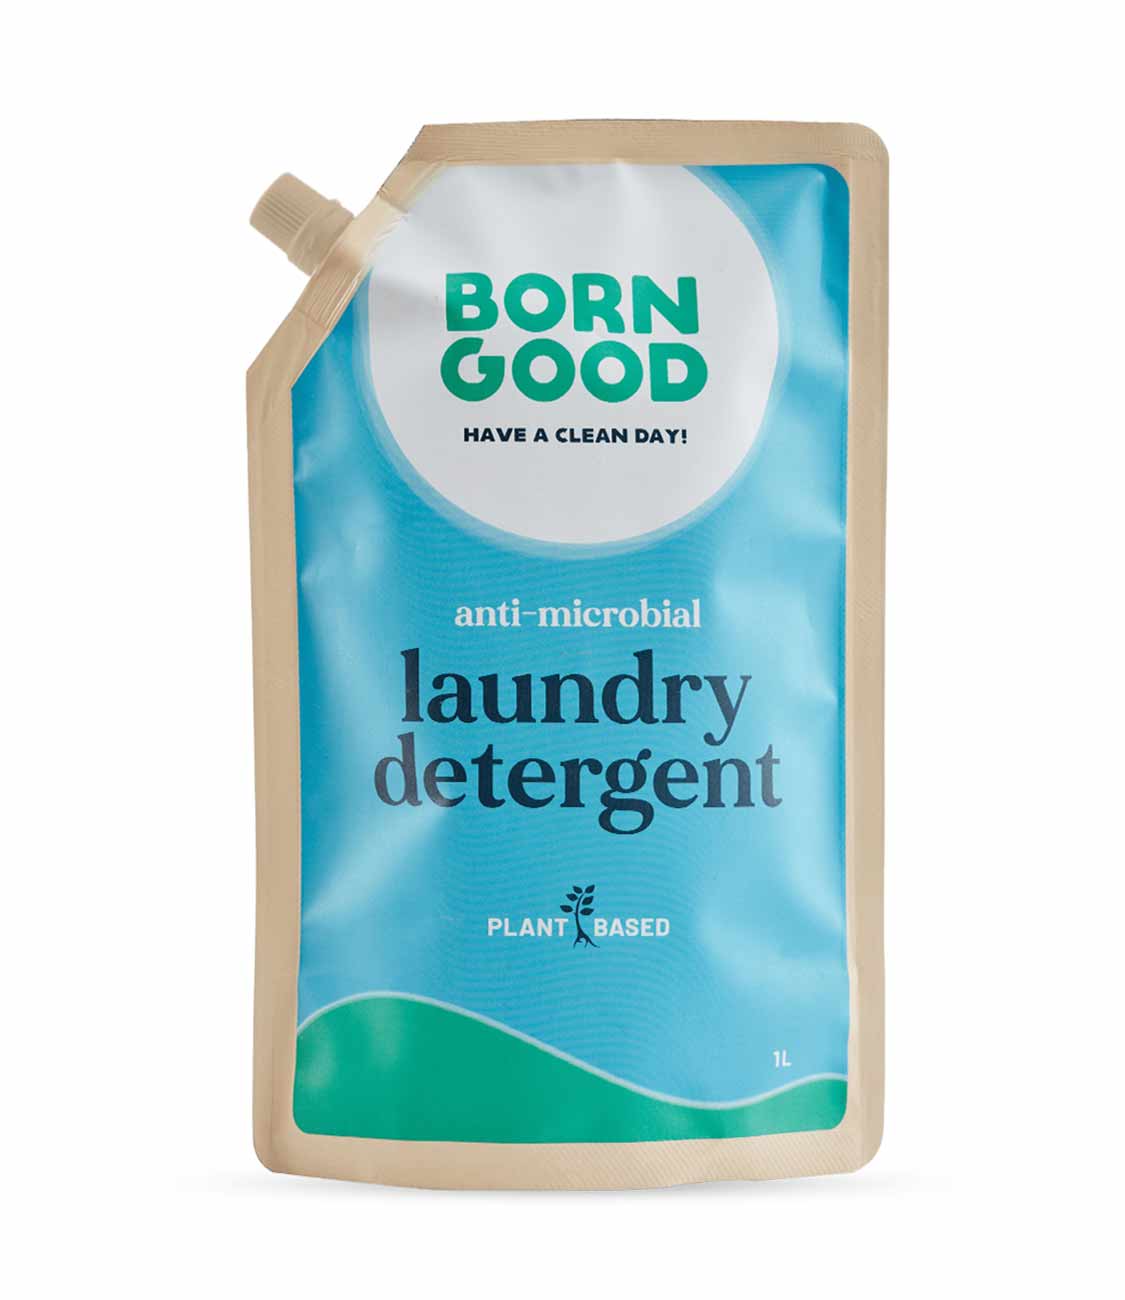 Born Good Plant-based Anti Microbial Laundry Detergent - 1 L Refill